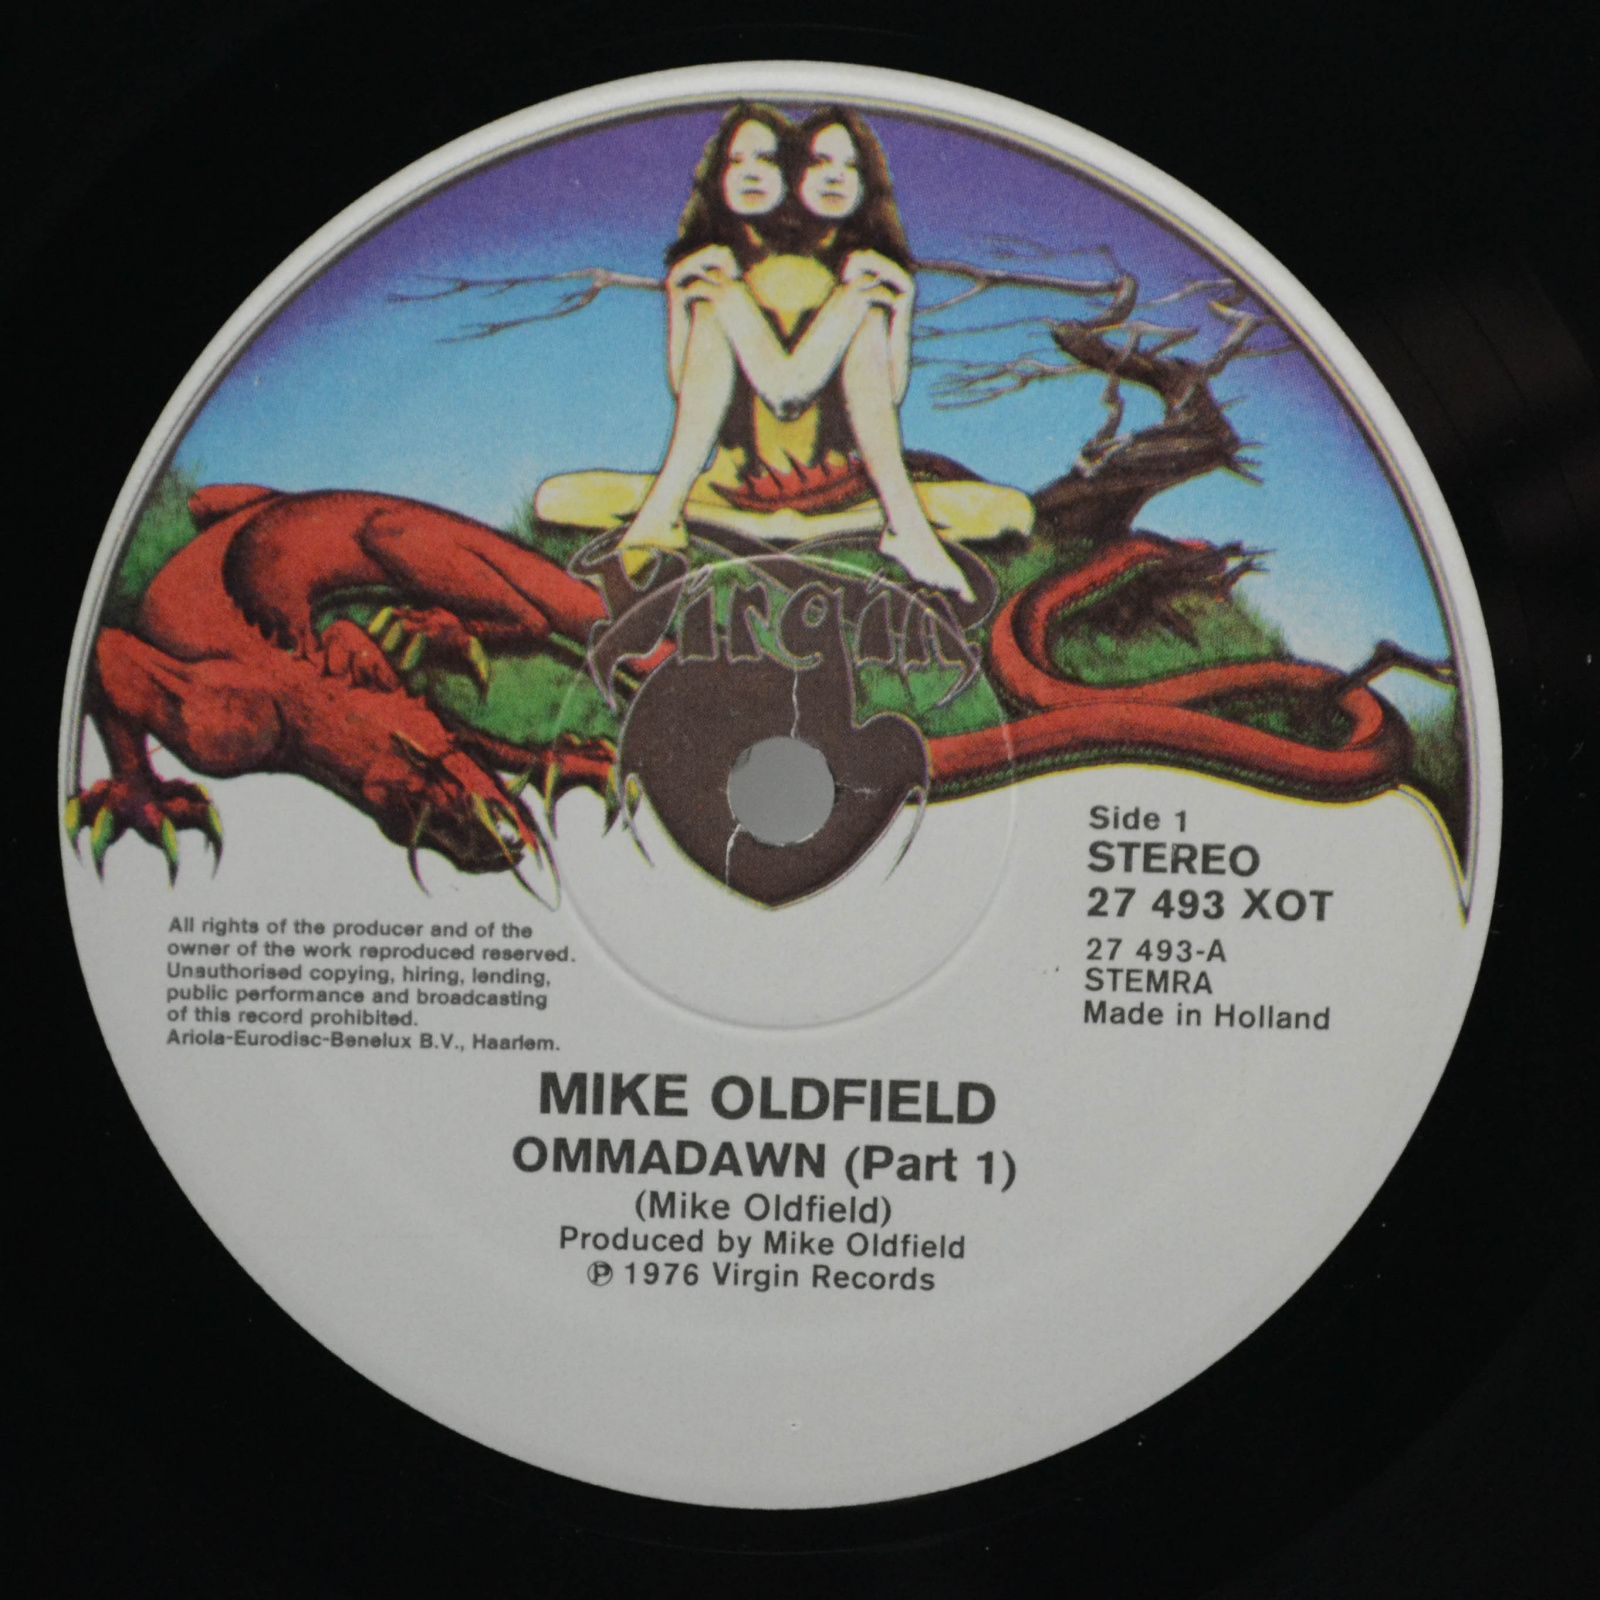 Mike Oldfield — Ommadawn, 1975